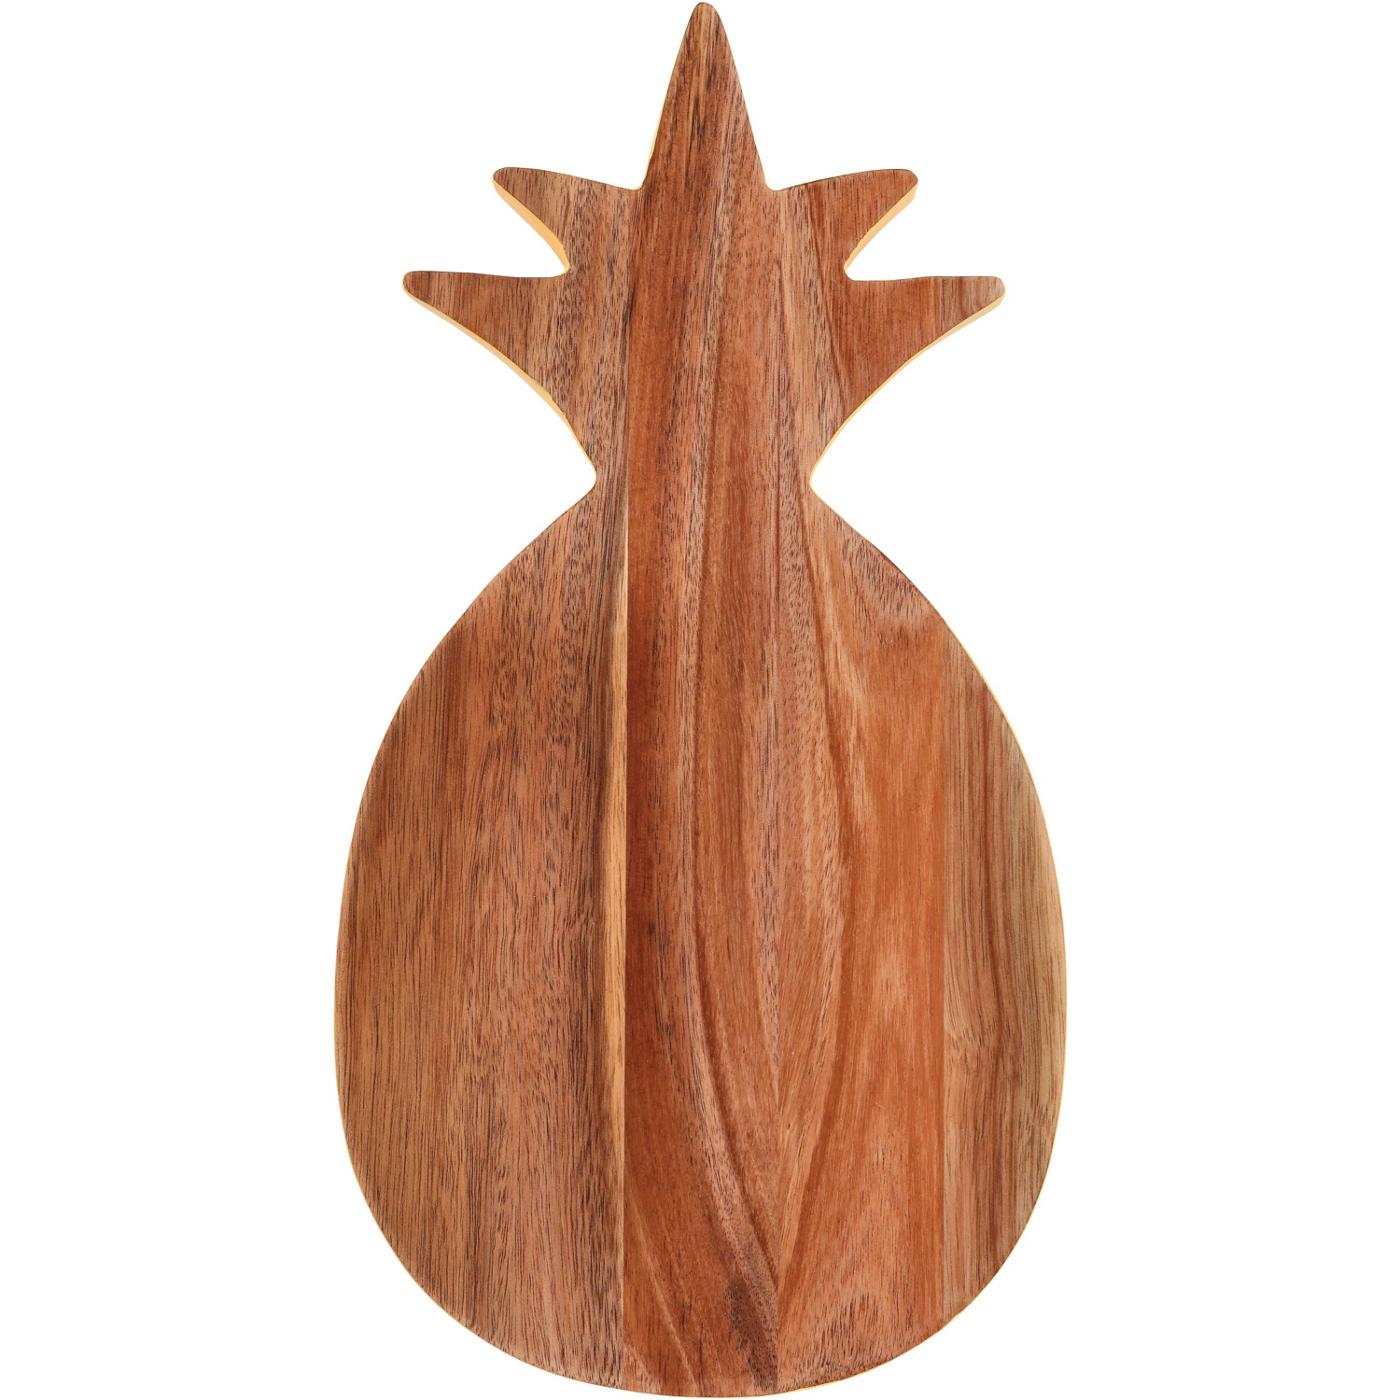 Destination Holiday Acacia Pineapple Serving Board; image 1 of 3